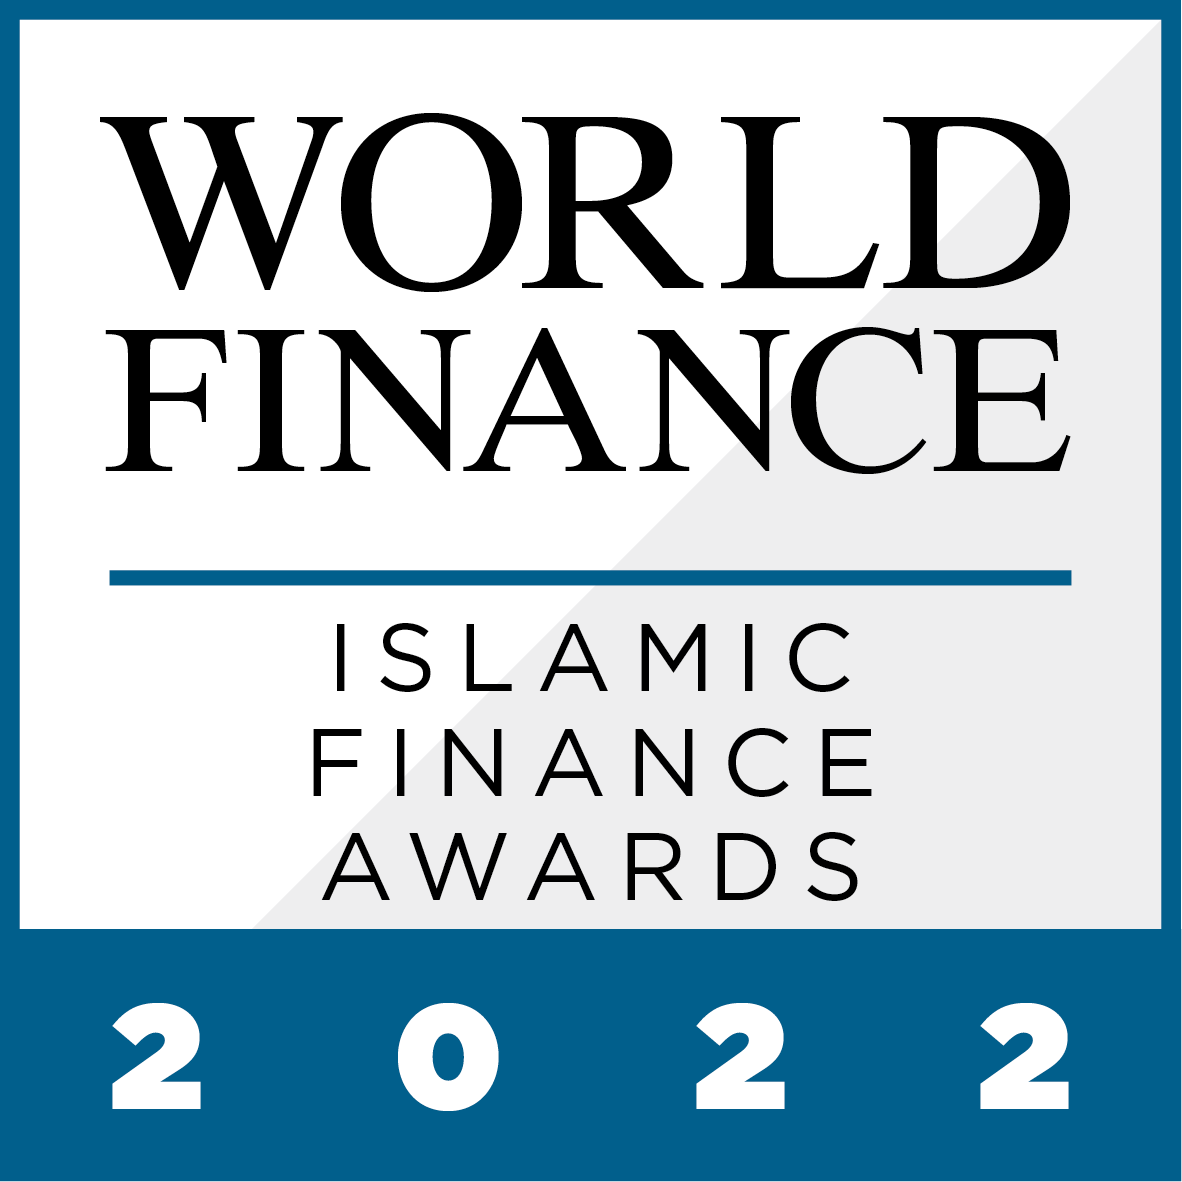 The outlook for the Islamic Finance industry is very positive following the pandemic and looks set for continued growth in 2022 despite the prospect of higher interest rates, higher oil prices and a decline in sukuk issuance.